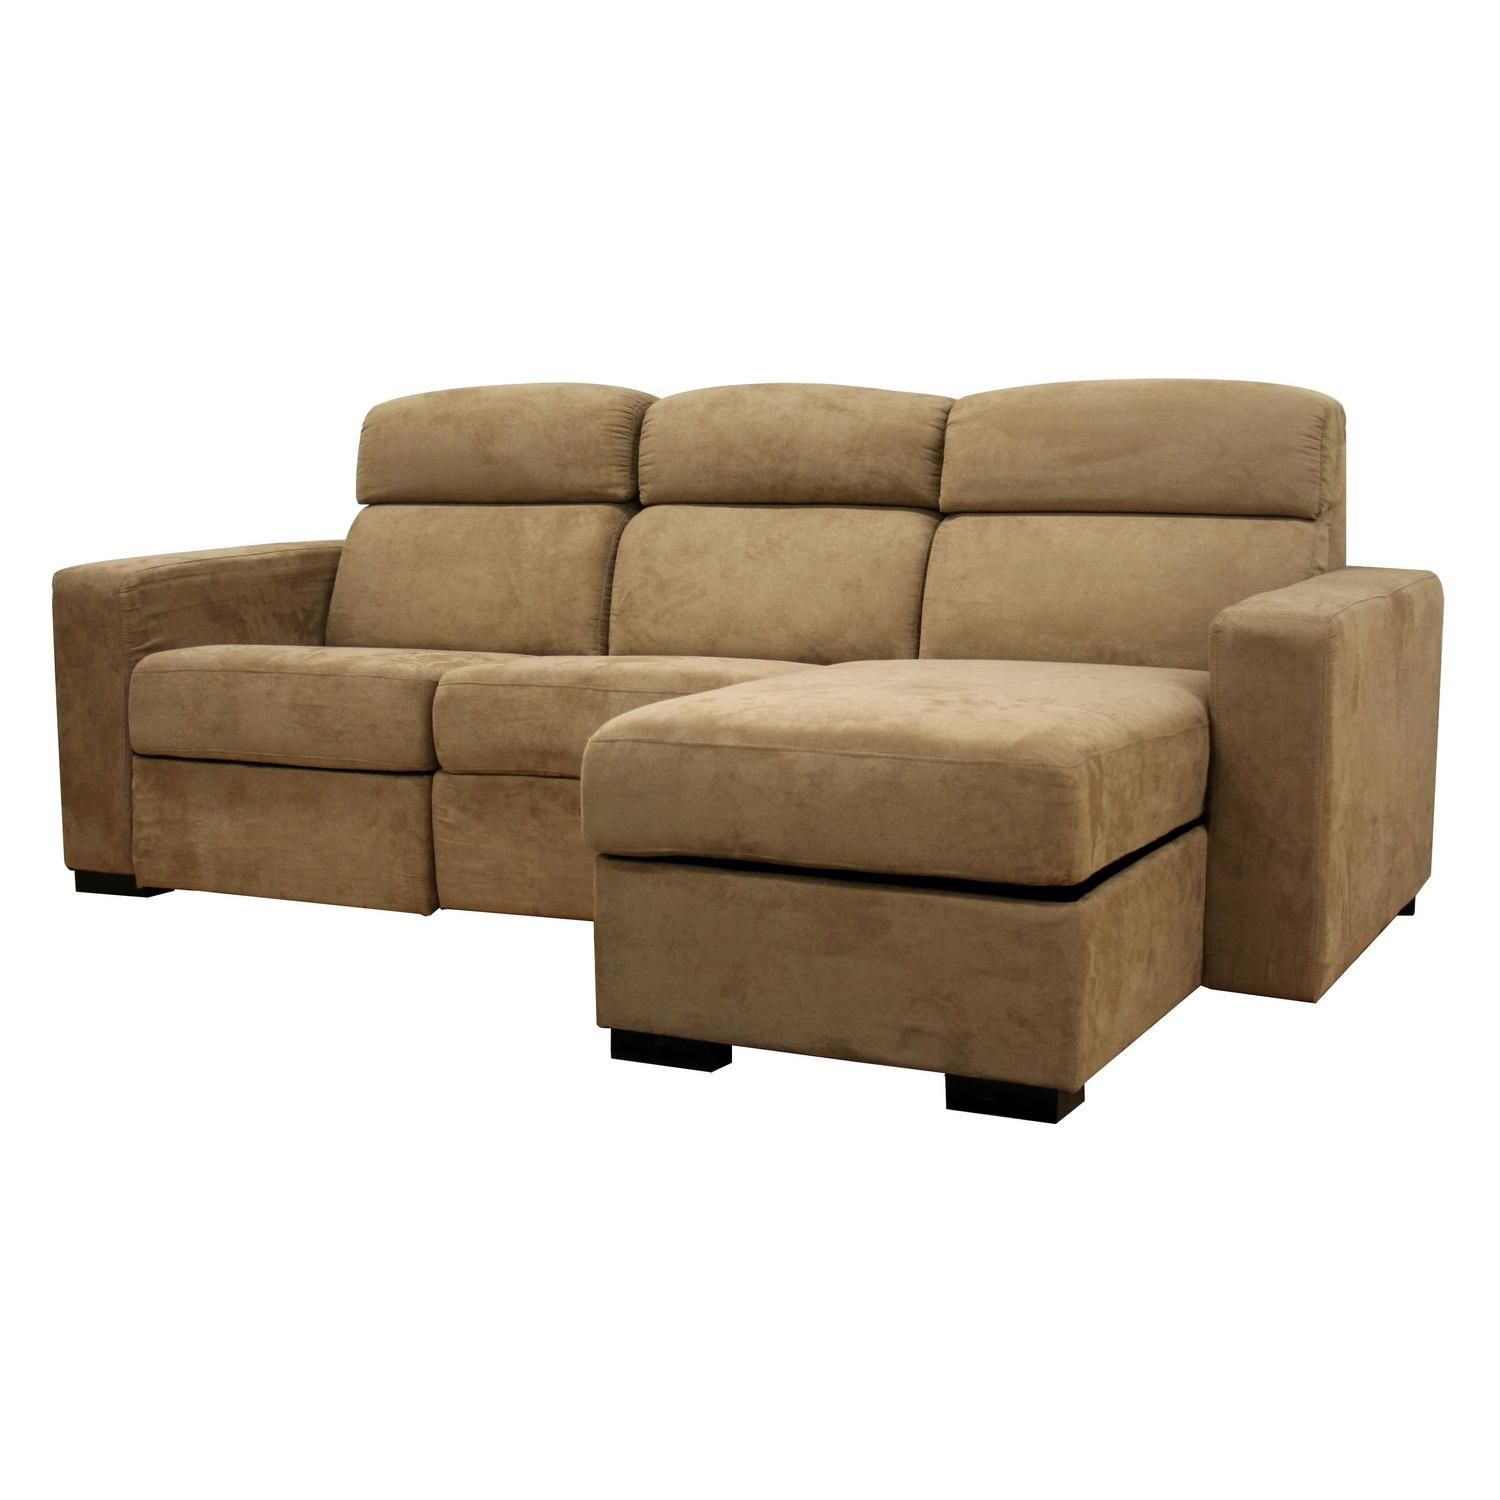 Holcomb Tan Microfiber Storage Chaise And Reclining For Copenhagen Reclining Sectional Sofas With Right Storage Chaise (View 6 of 15)